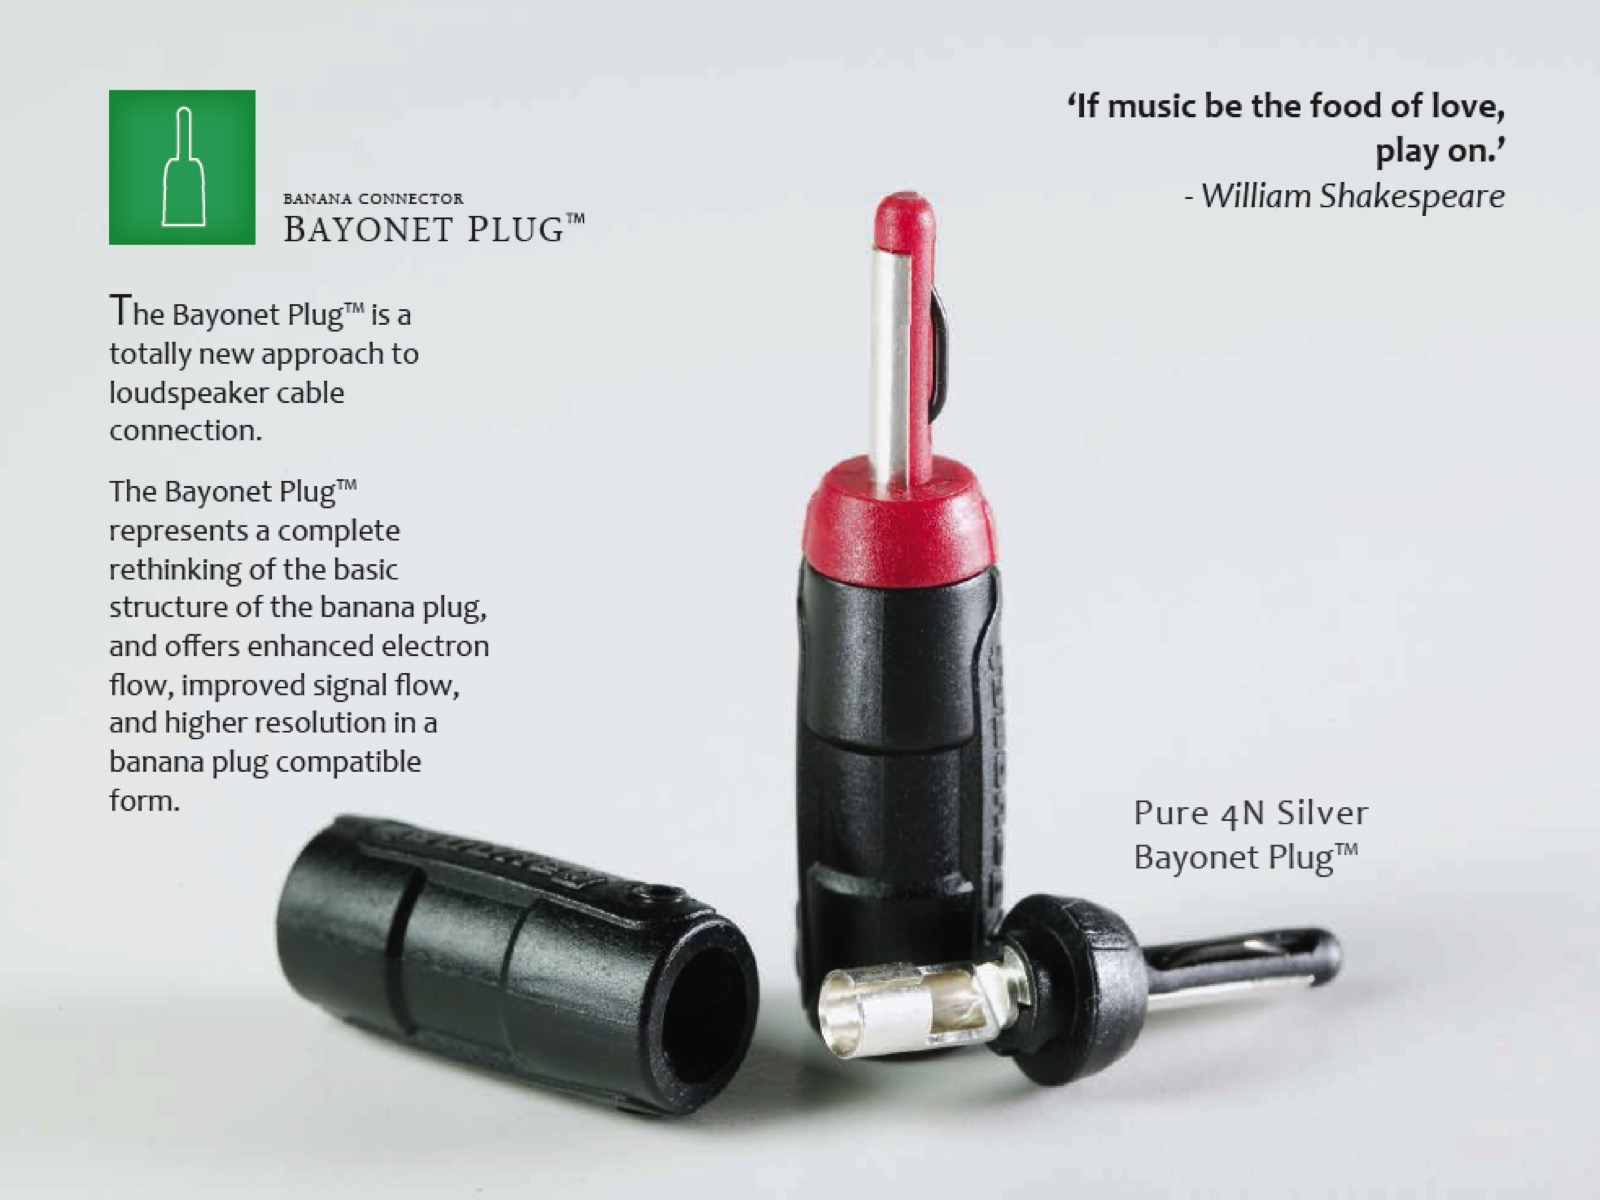 The ETI Silver Bayonet Plug ™ innovations and reﬁnements include. 